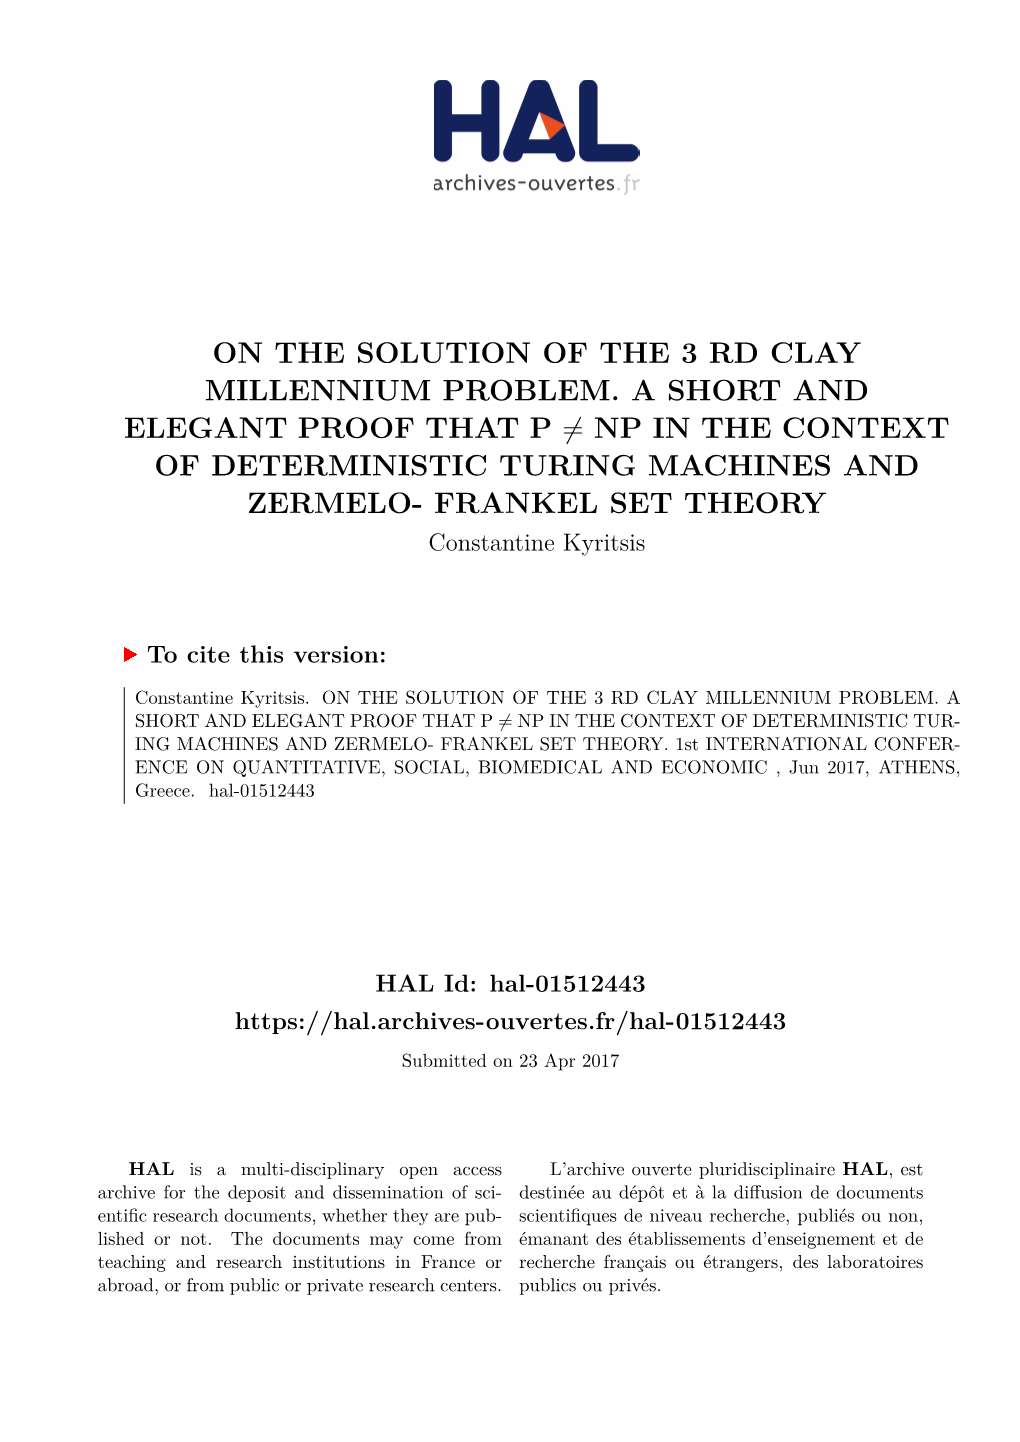 On the Solution of the 3 Rd Clay Millennium Problem. A